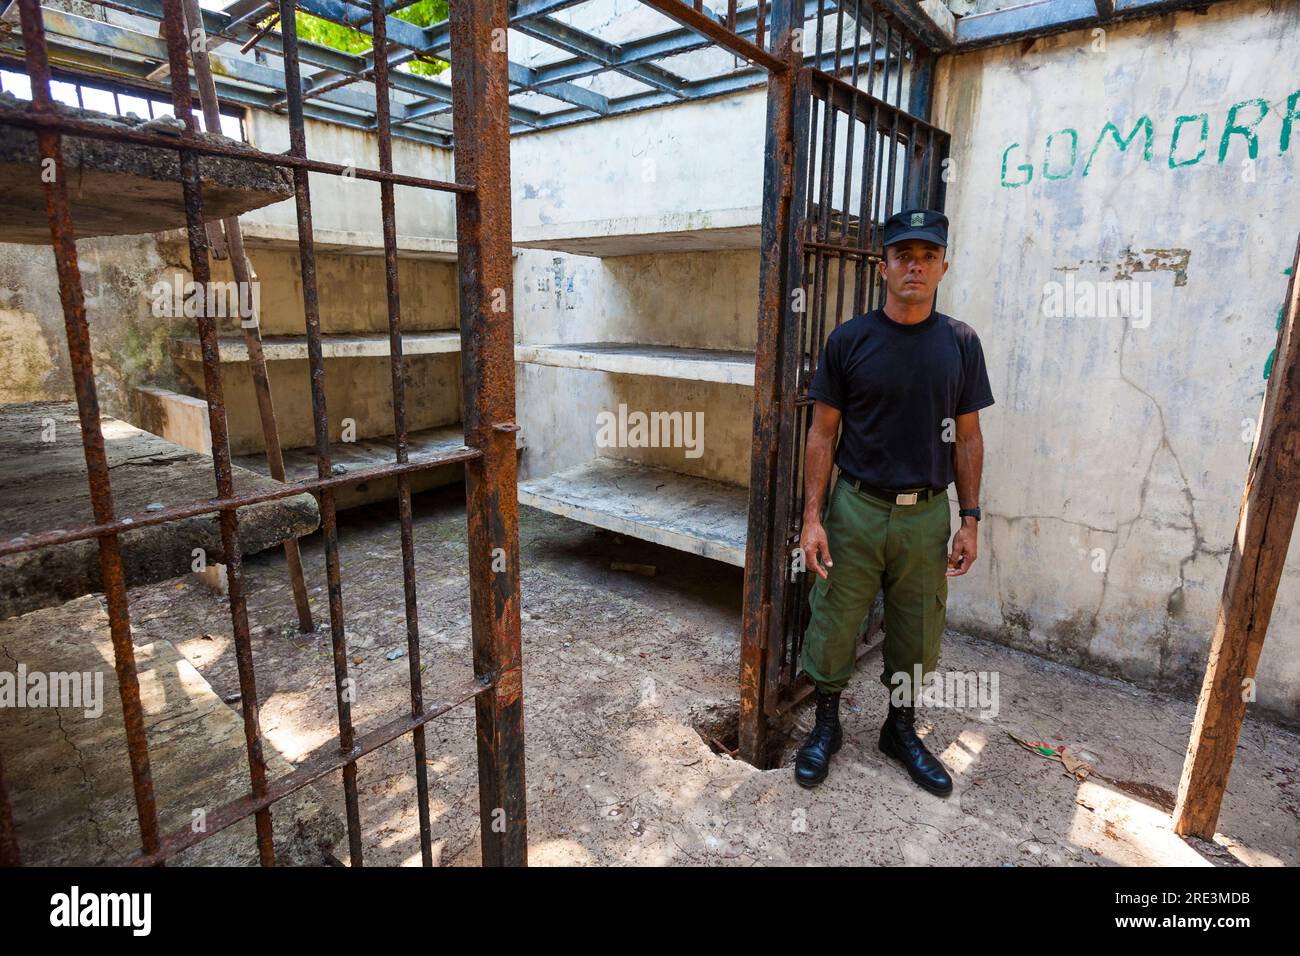 Police officer from the Panama police force outside a cell in the old prison at Coiba Island, Pacific coast, Veraguas Province, Republic of Panama. Stock Photo